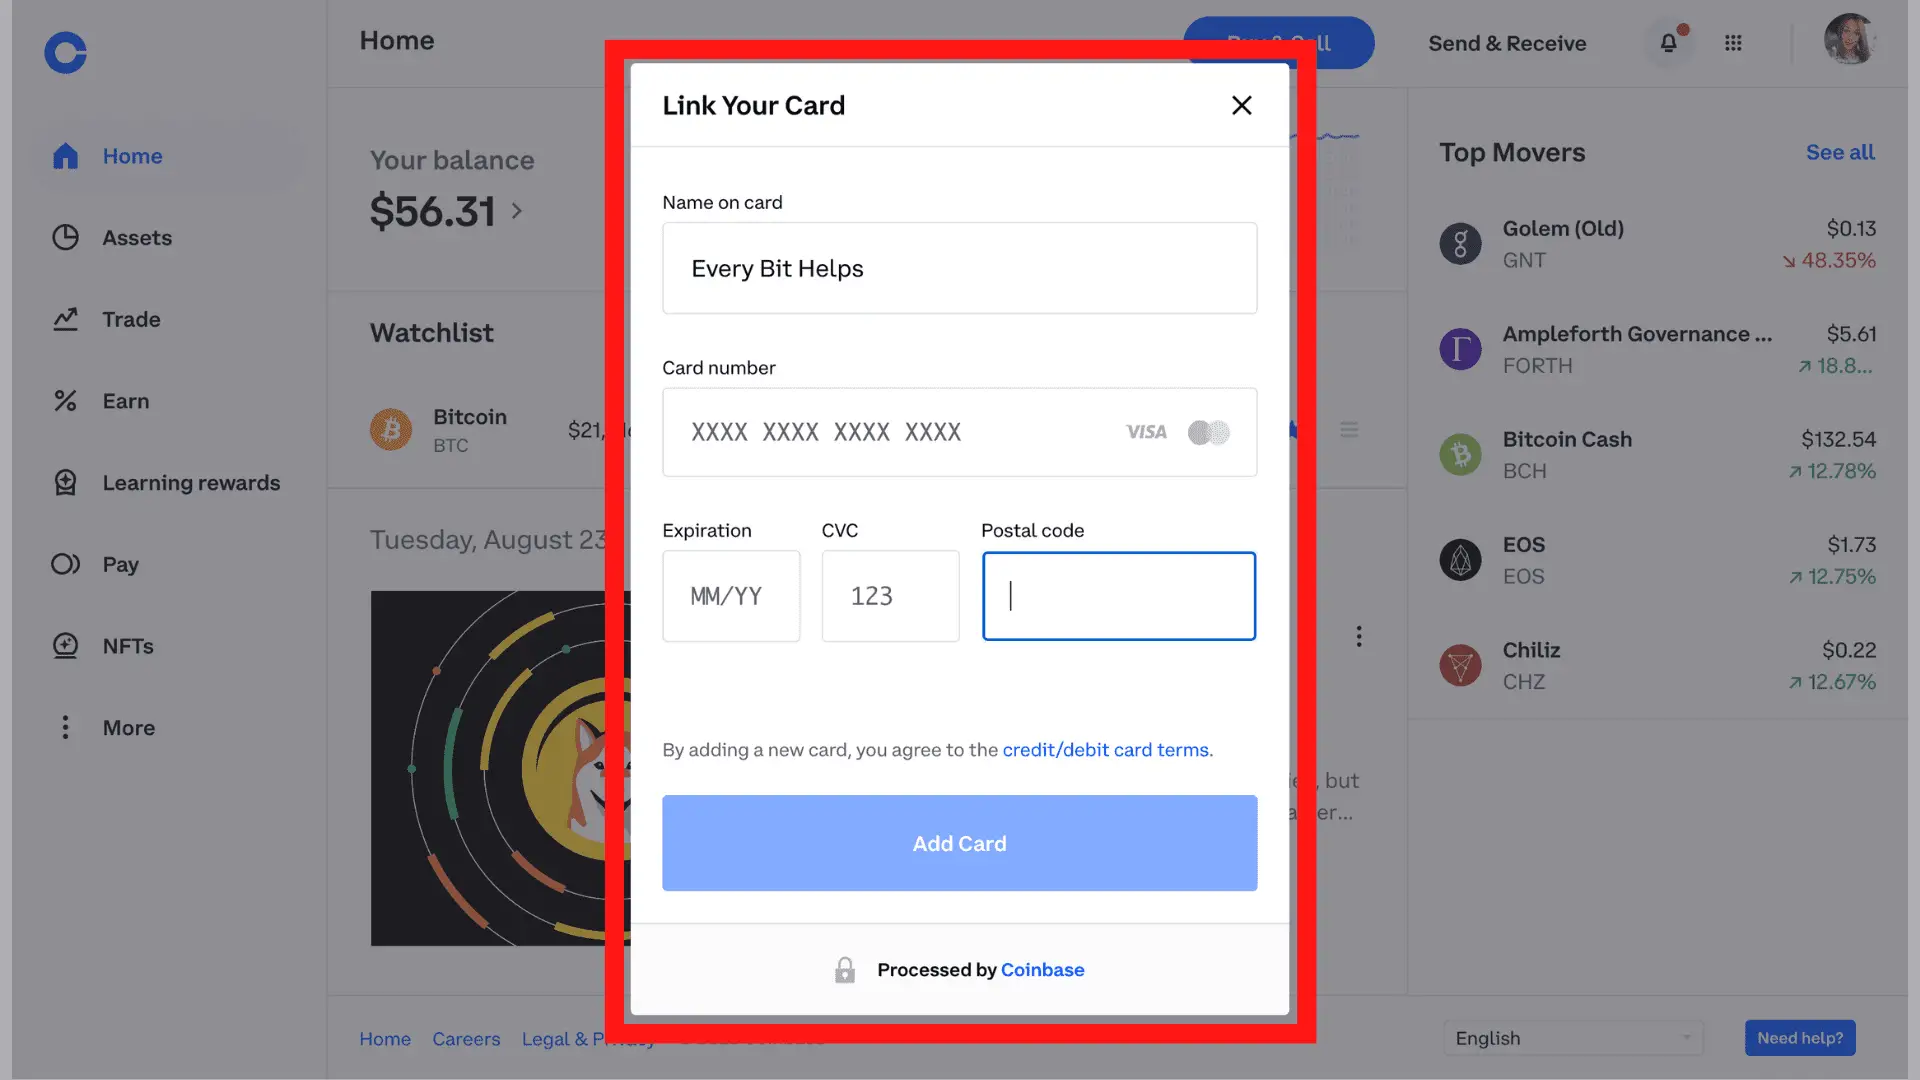 Link new card to Coinbase